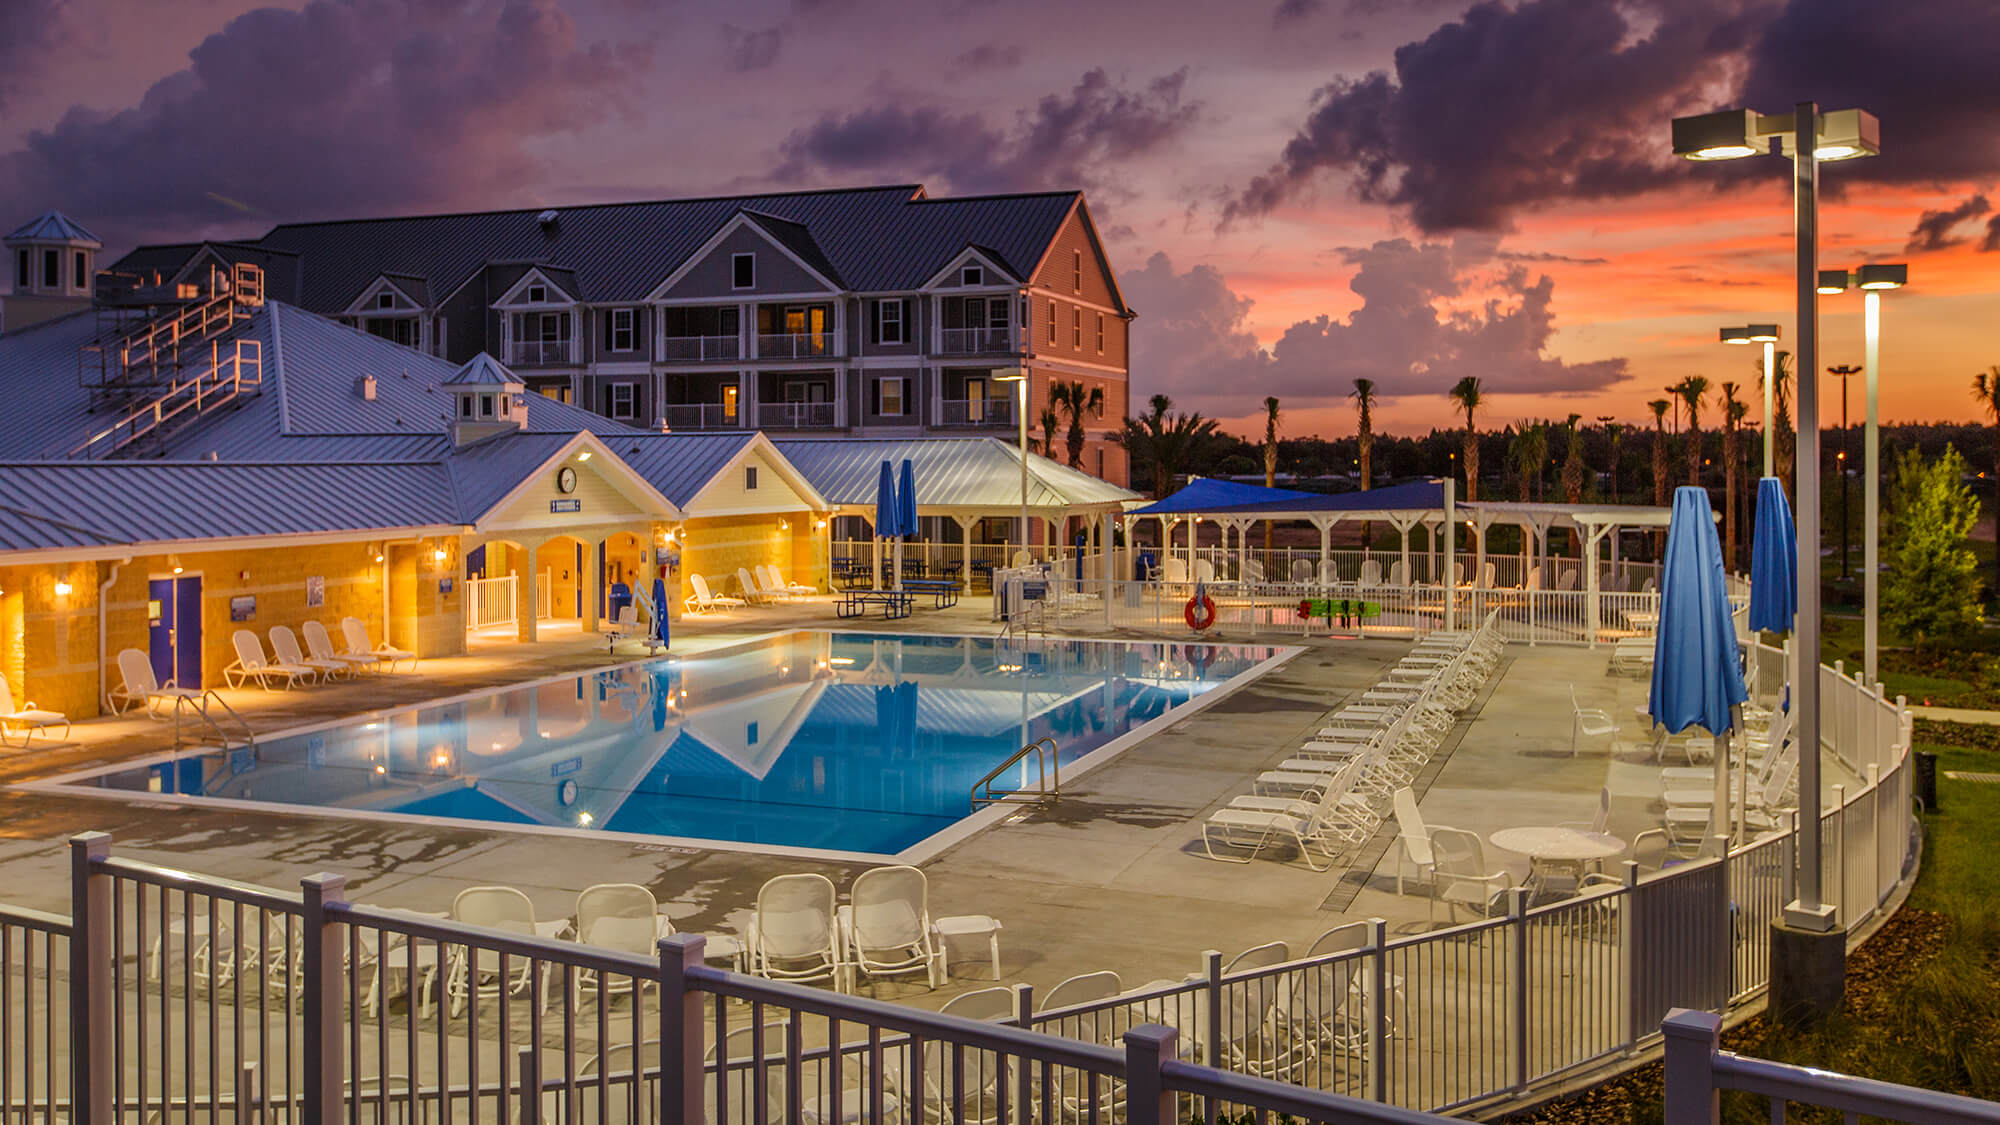 Pool, pool deck and exterior of Holiday Inn Club Vacations Orlando Breeze Resort in Davenport, FL